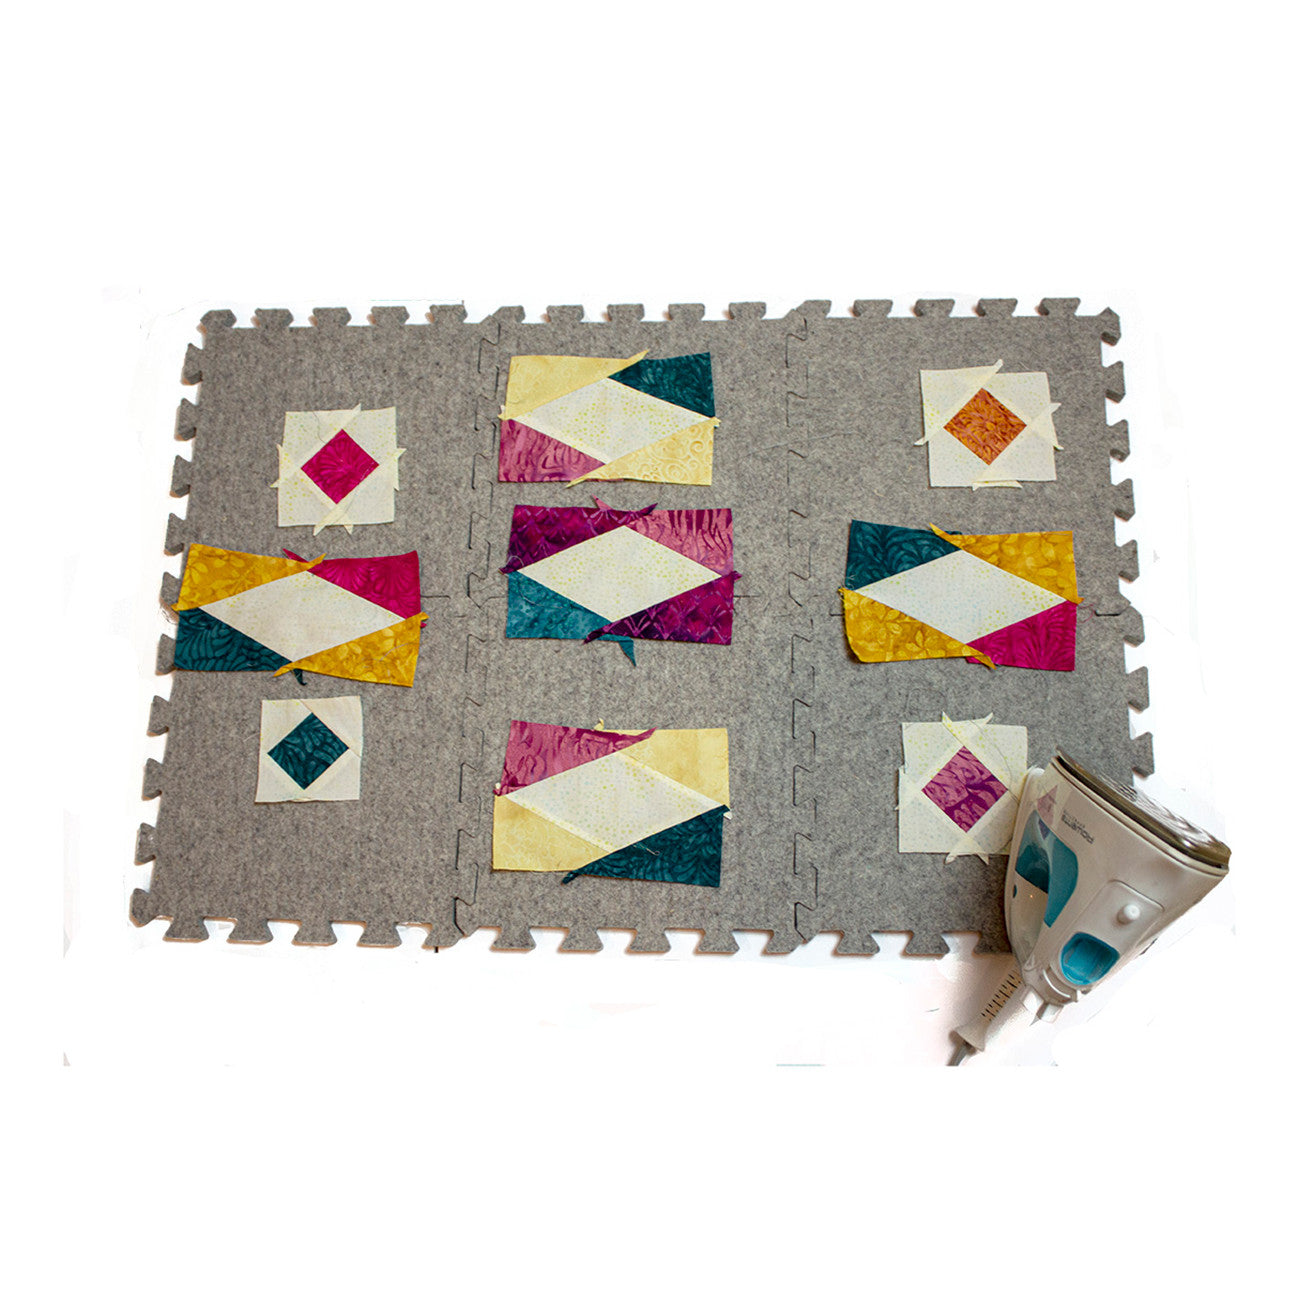 Wool Press 'n Lock Tiles Set of 4 Home Kit from Sewing By Sarah